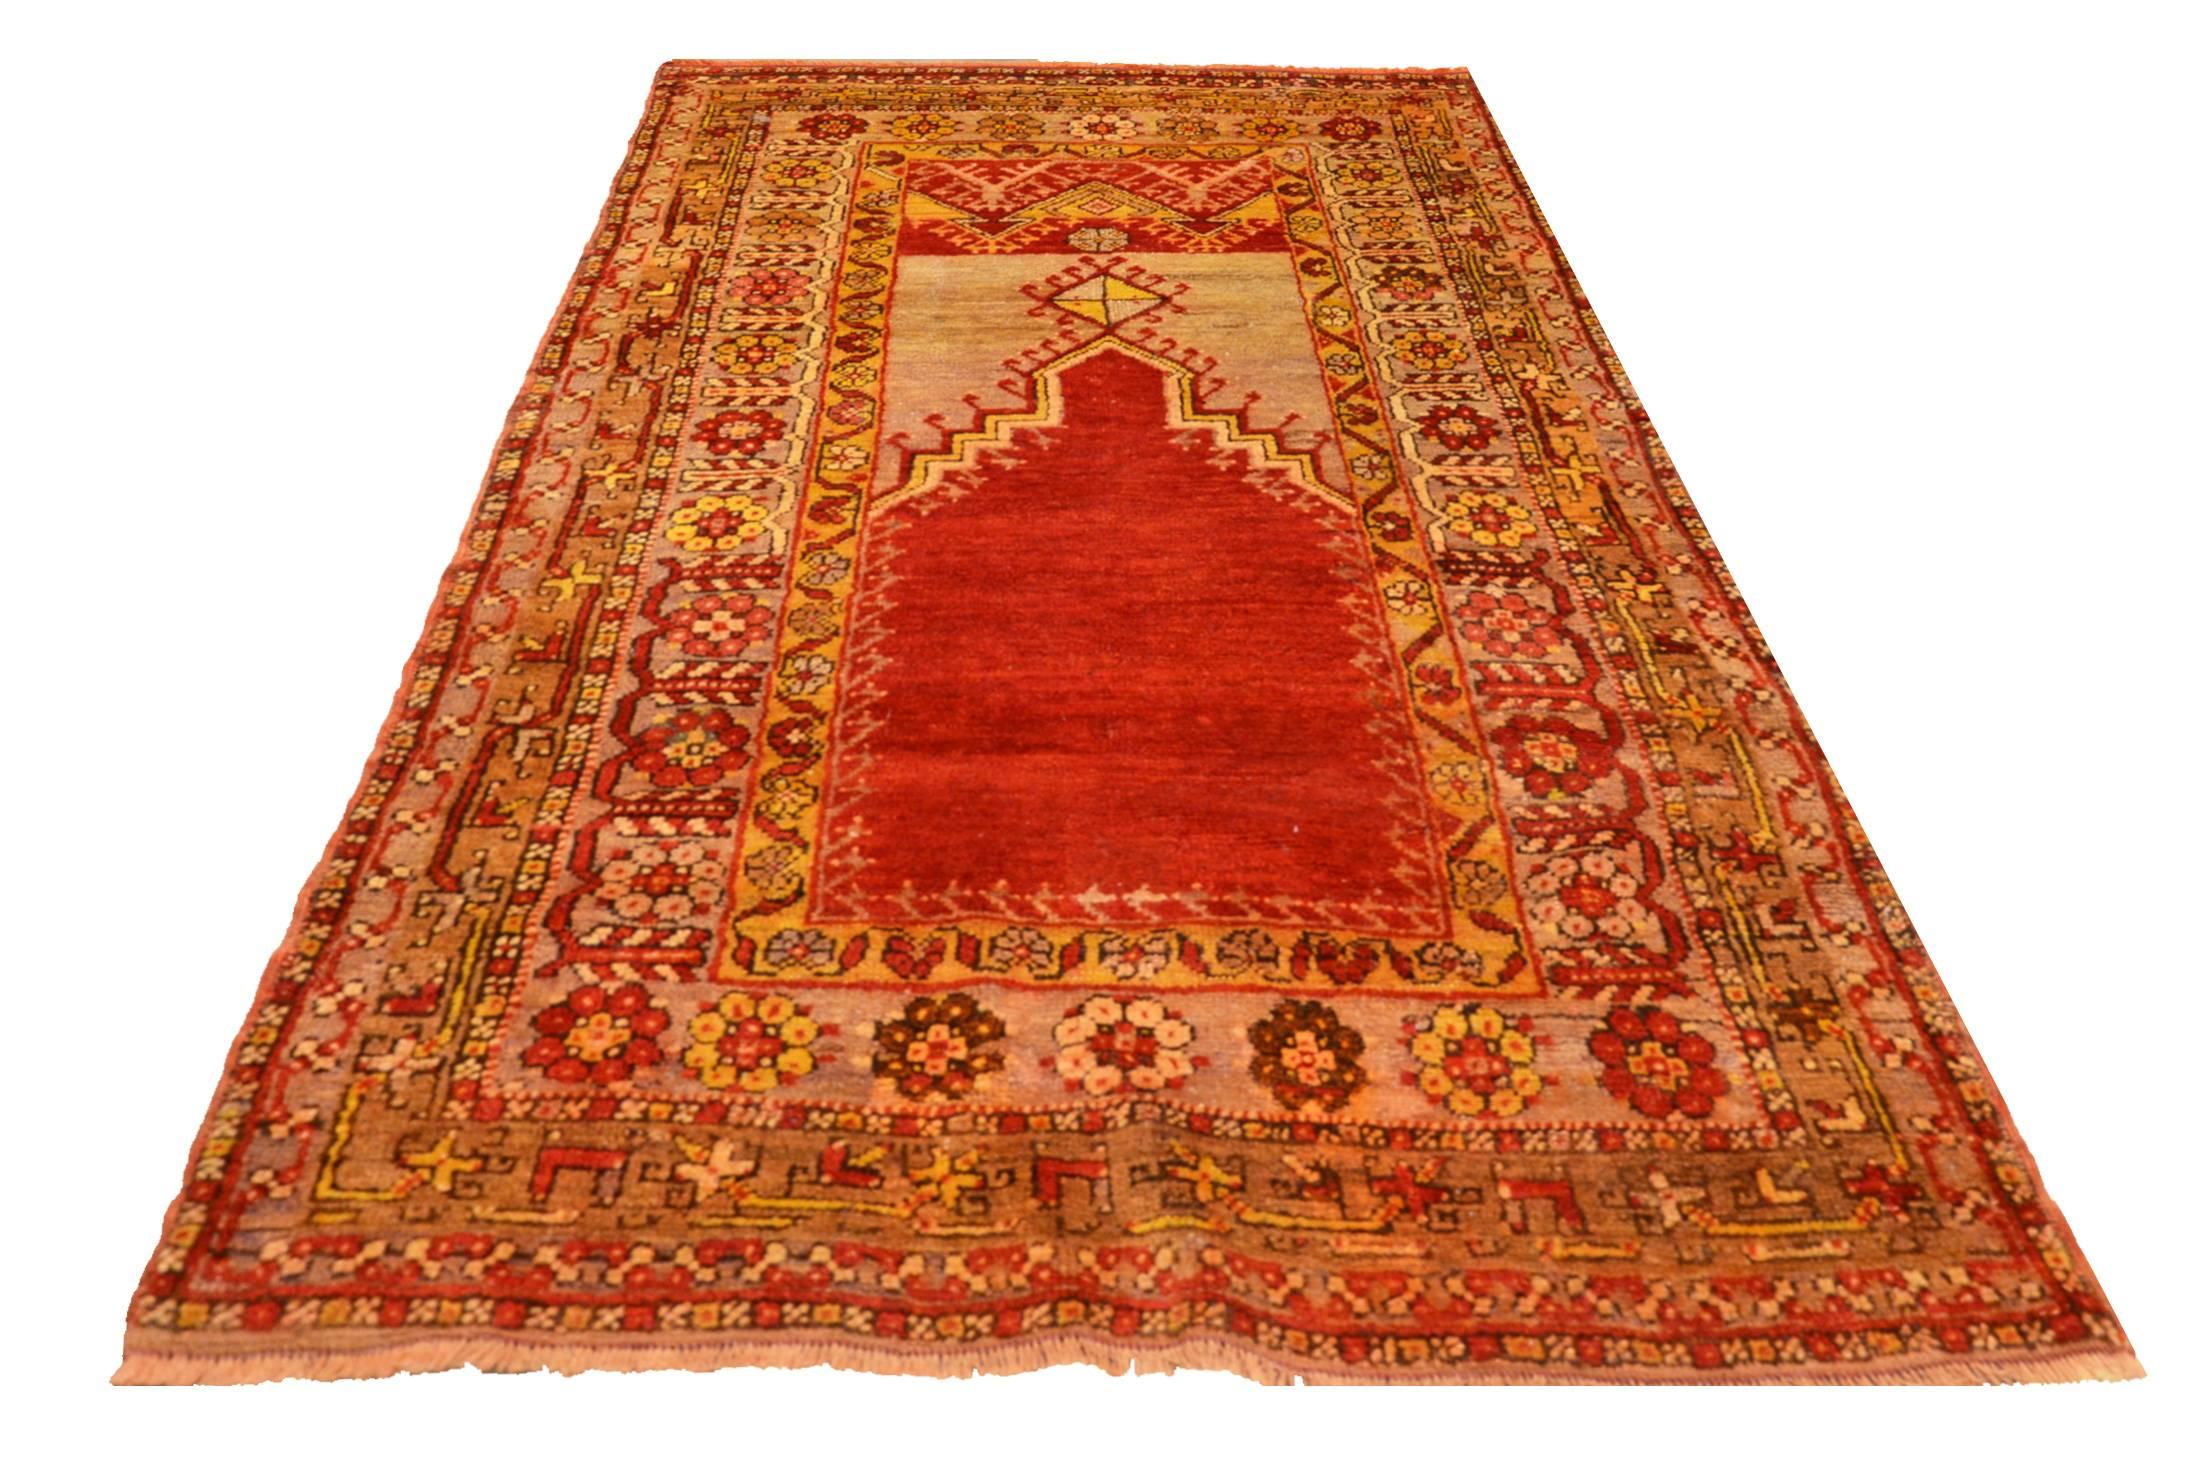 Turkish carpet with niche design, in reddish and gold tones. Piece of collection and perfect state of conservation. Great decorative work in field and borders.